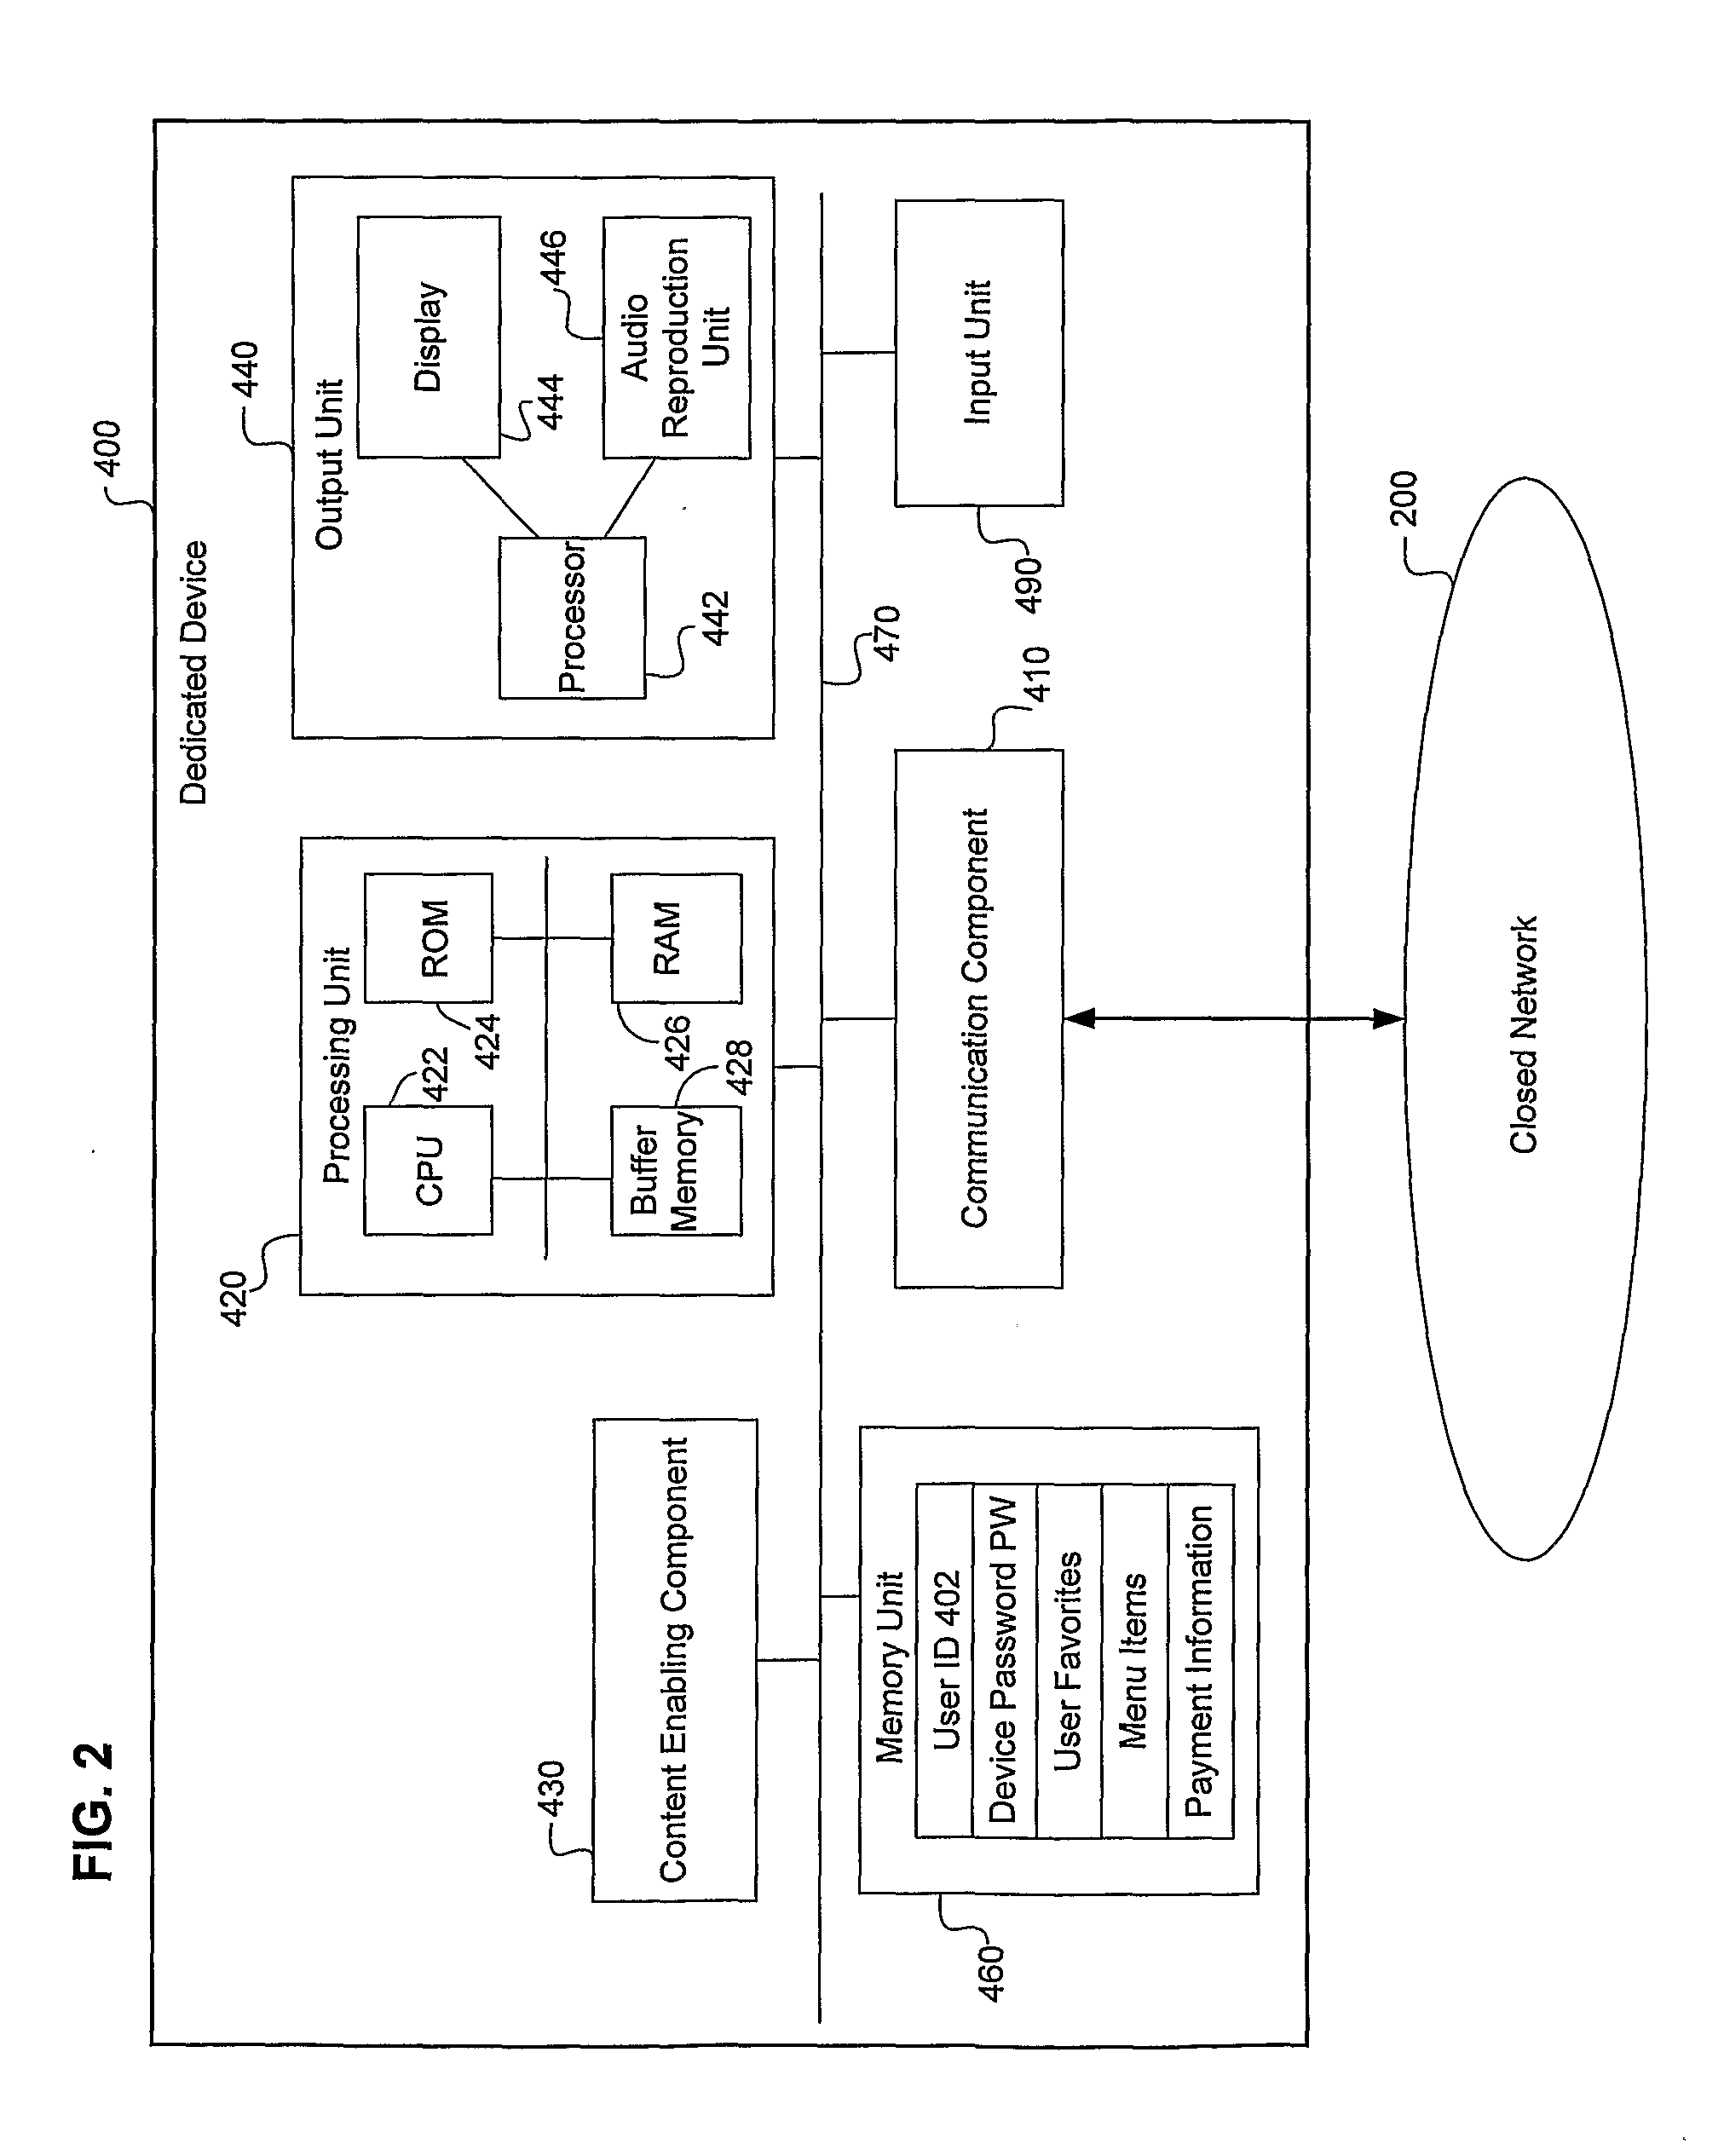 System and Method For Securely Communicating On-Demand Content From Closed Network to Dedicated Devices, and For Compiling Content Usage Data in Closed Network Securely Communicating Content to Dedicated Devices